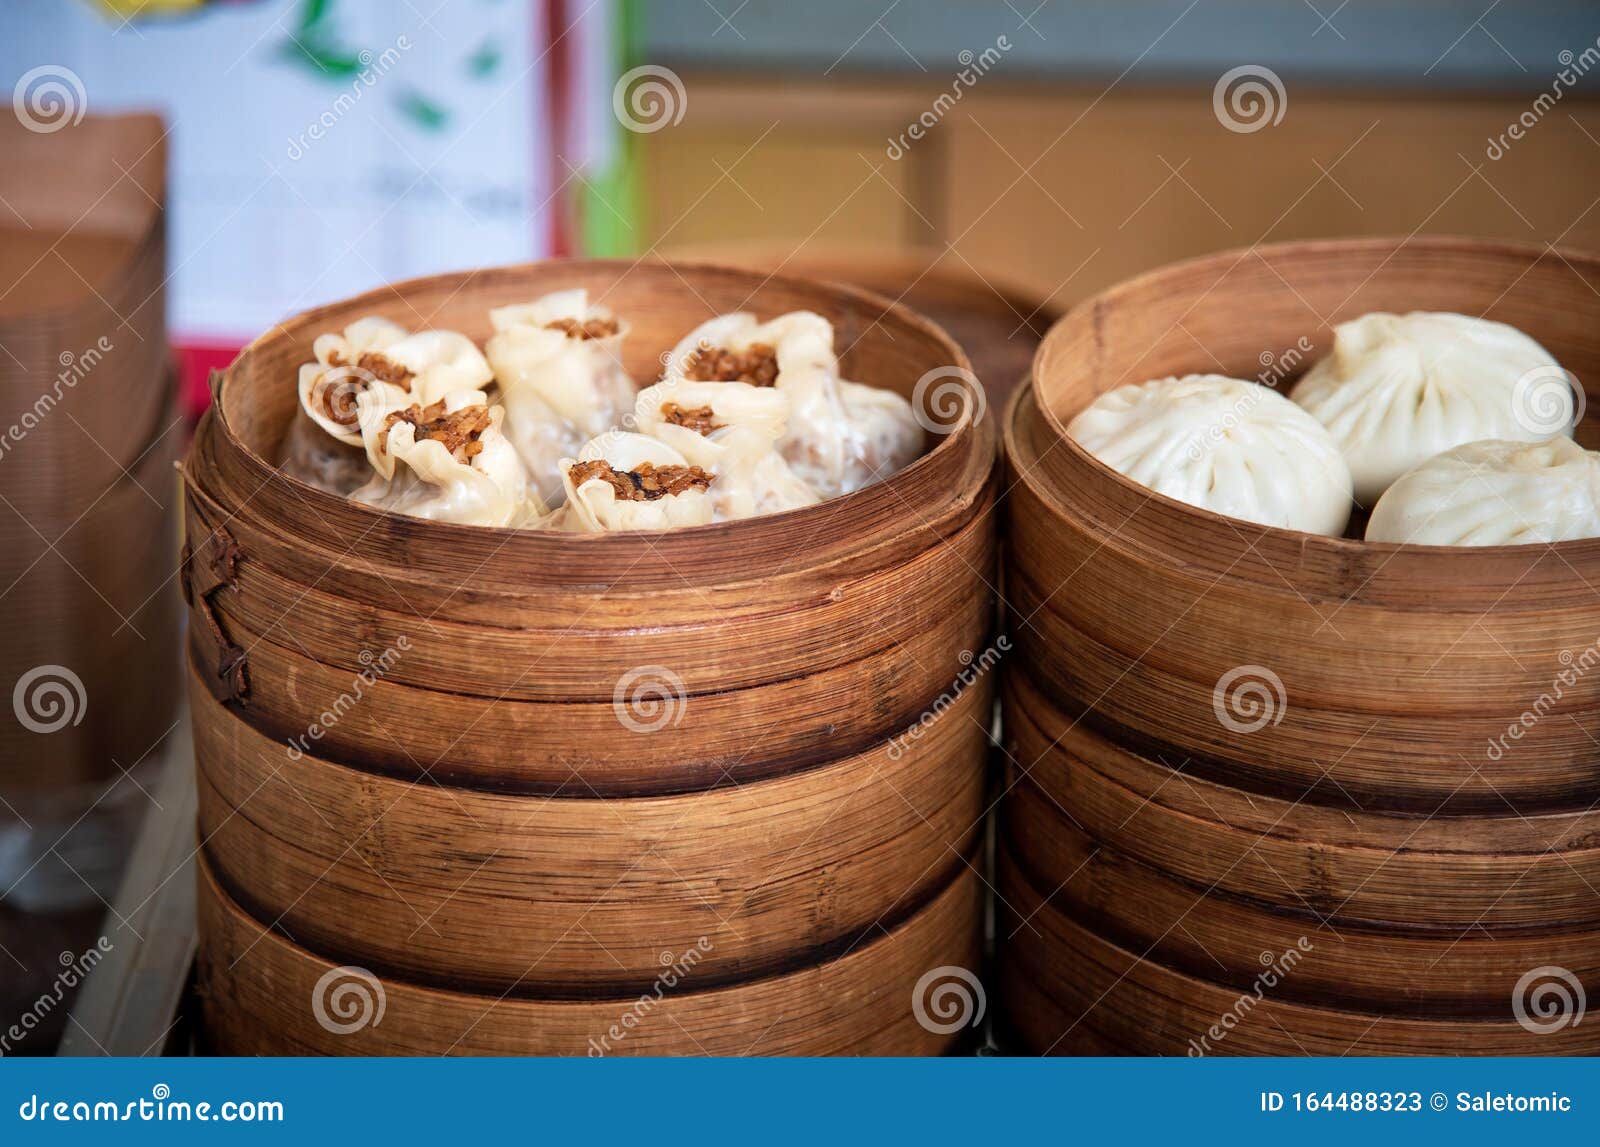 36 491 Chinese Food Street Photos Free Royalty Free Stock Photos From Dreamstime